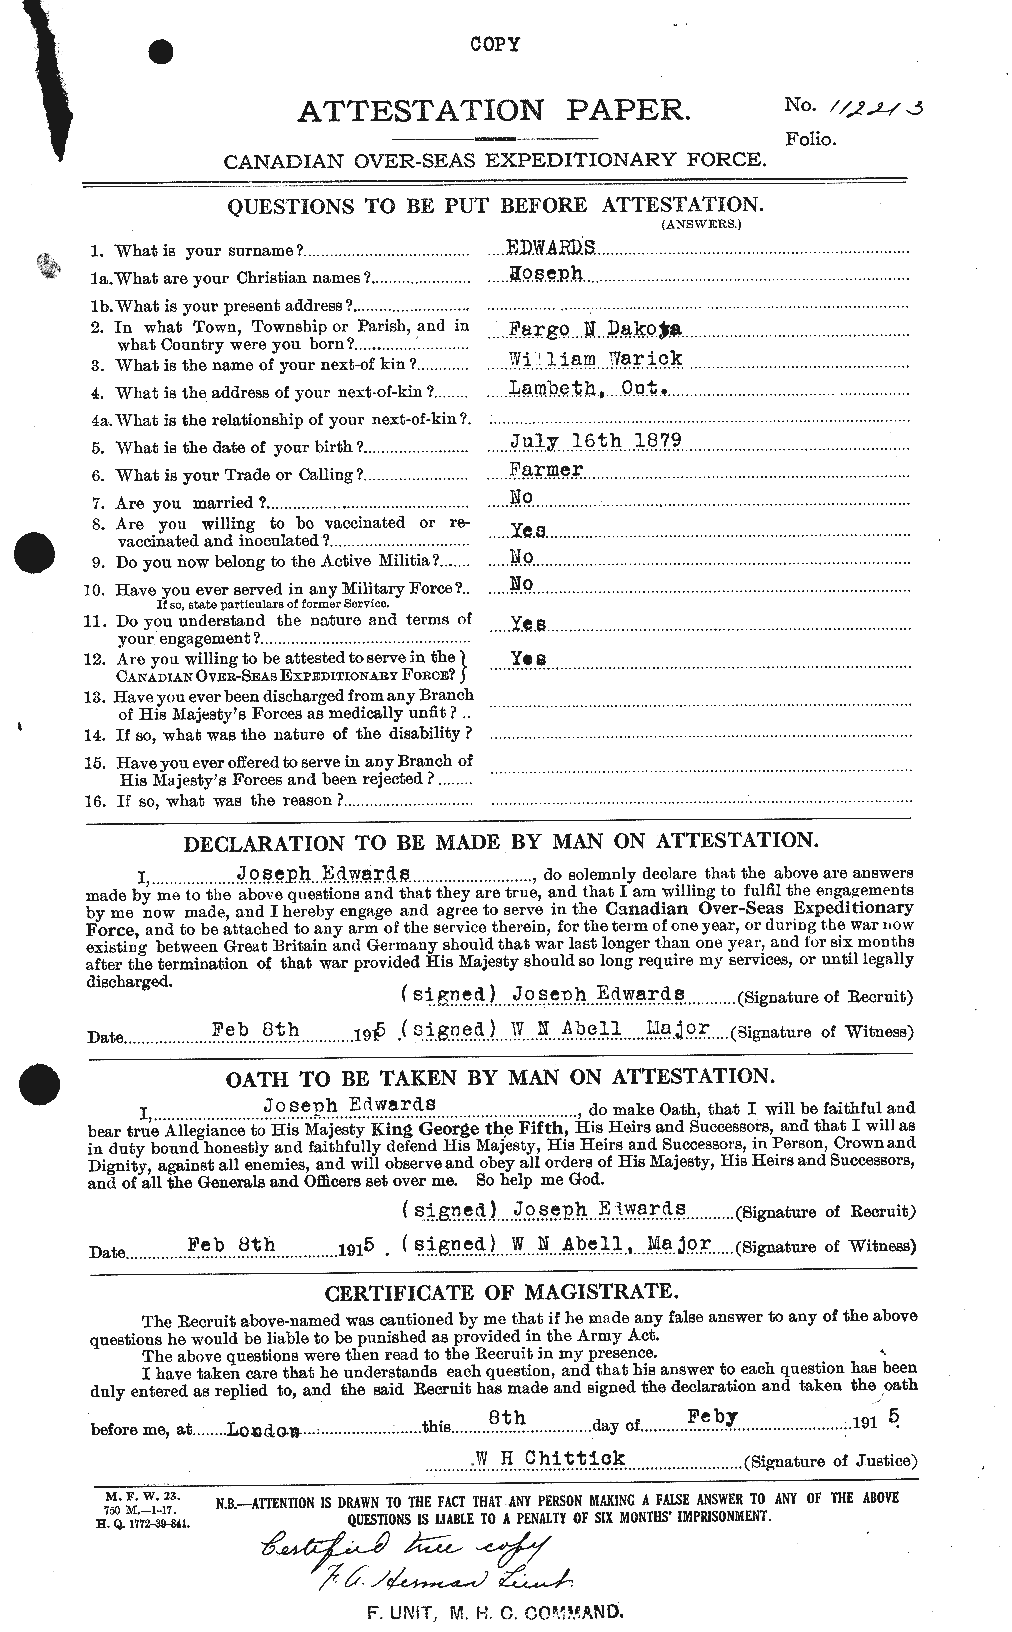 Personnel Records of the First World War - CEF 310177a